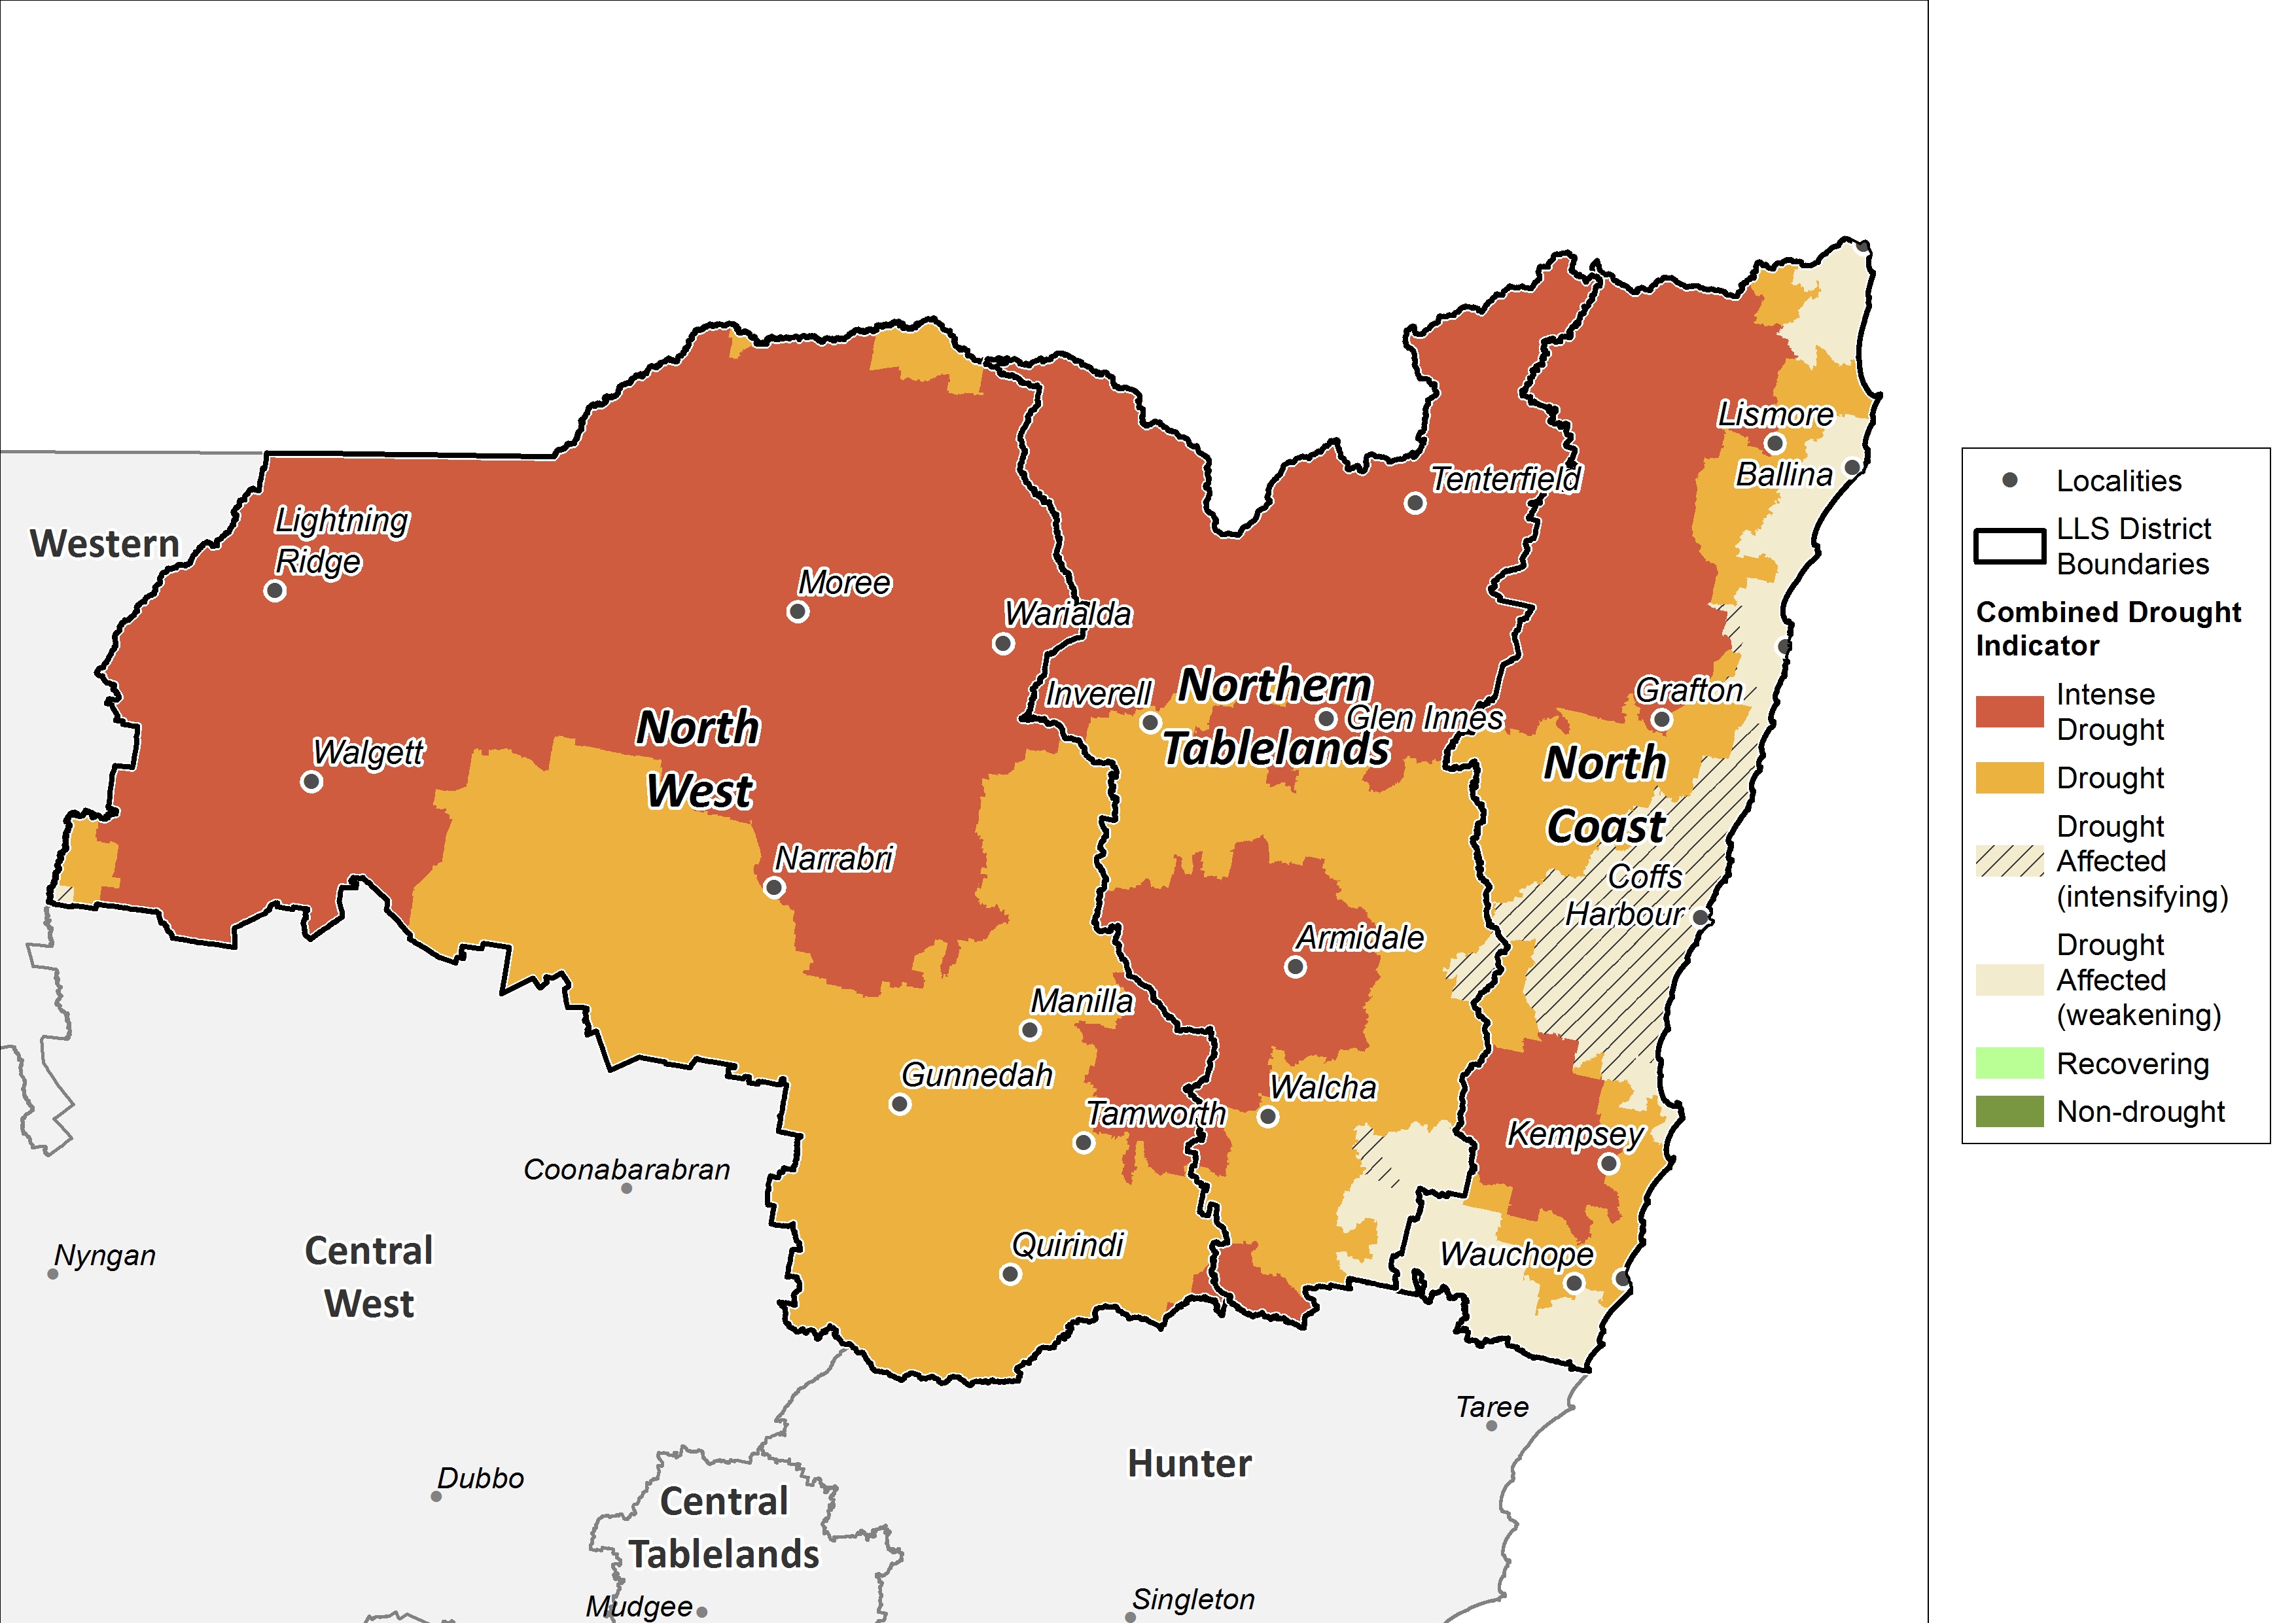 Combined Drought Indicator for the North West, Northern Tableland and North Coast regions - For an accessible explanation of this image contact scott.wallace@dpi.nsw.gov.au